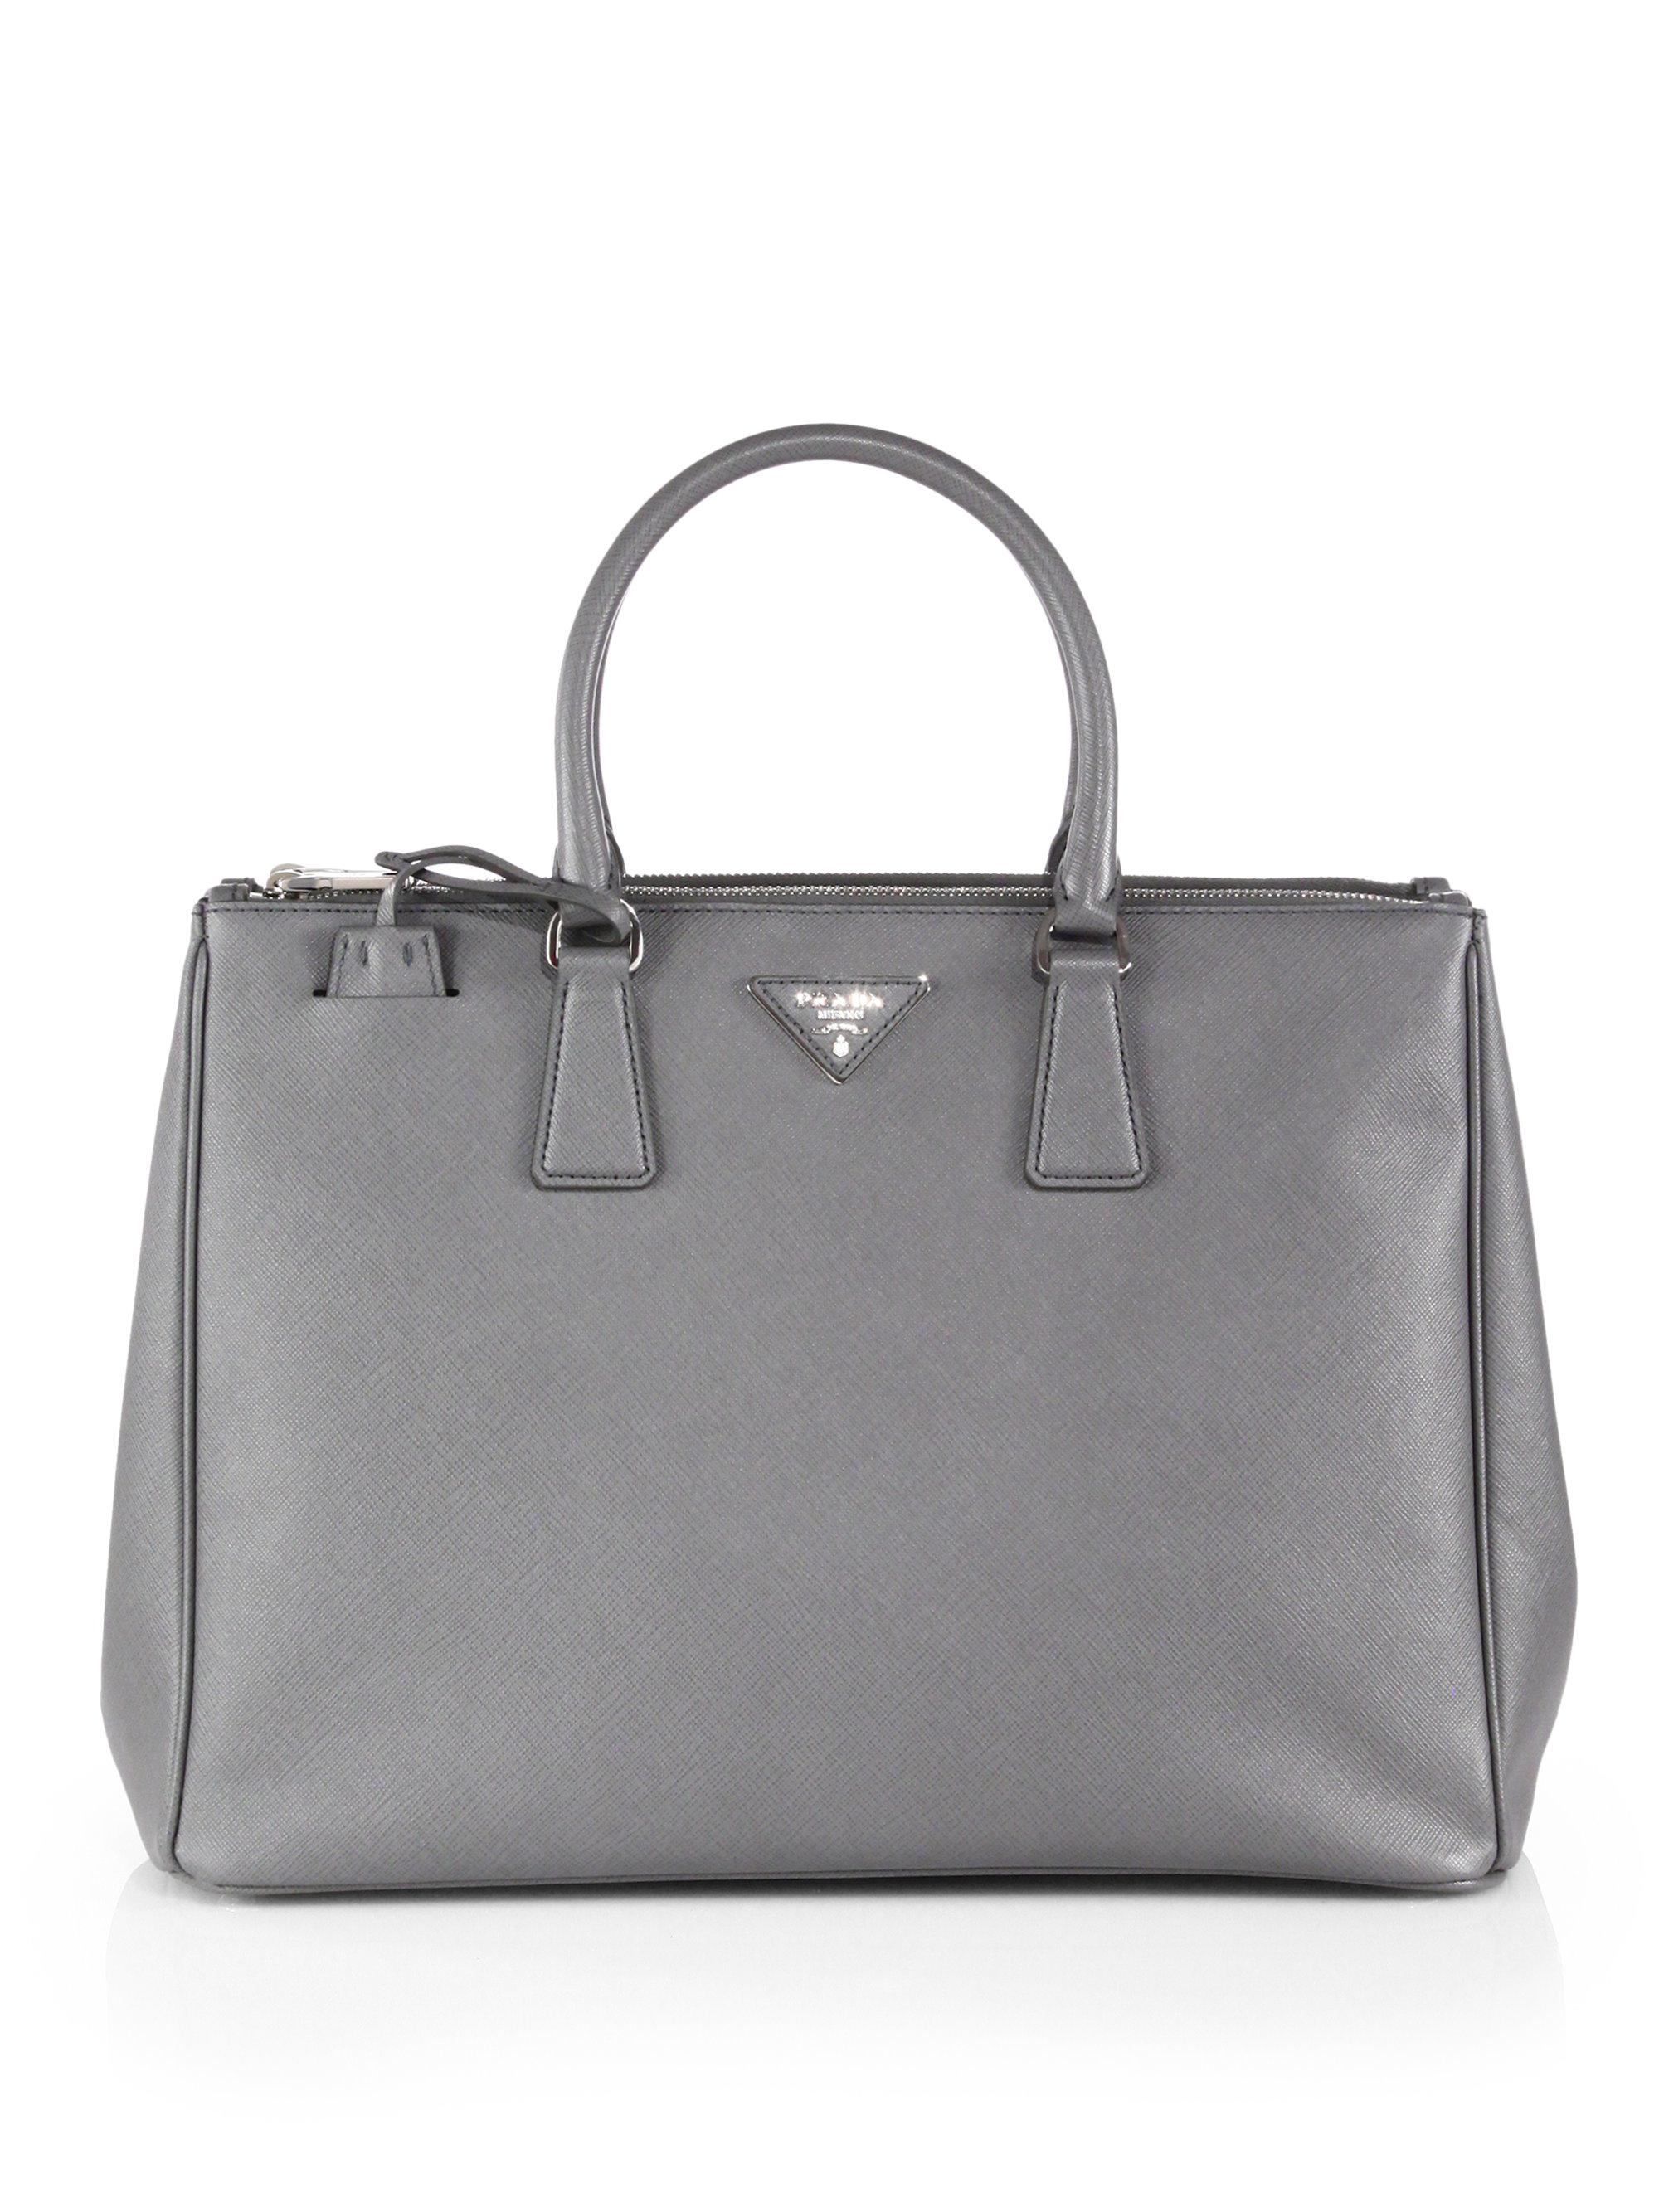 Prada Saffiano Lux Large Double-zip Tote in Grey (Gray) - Lyst